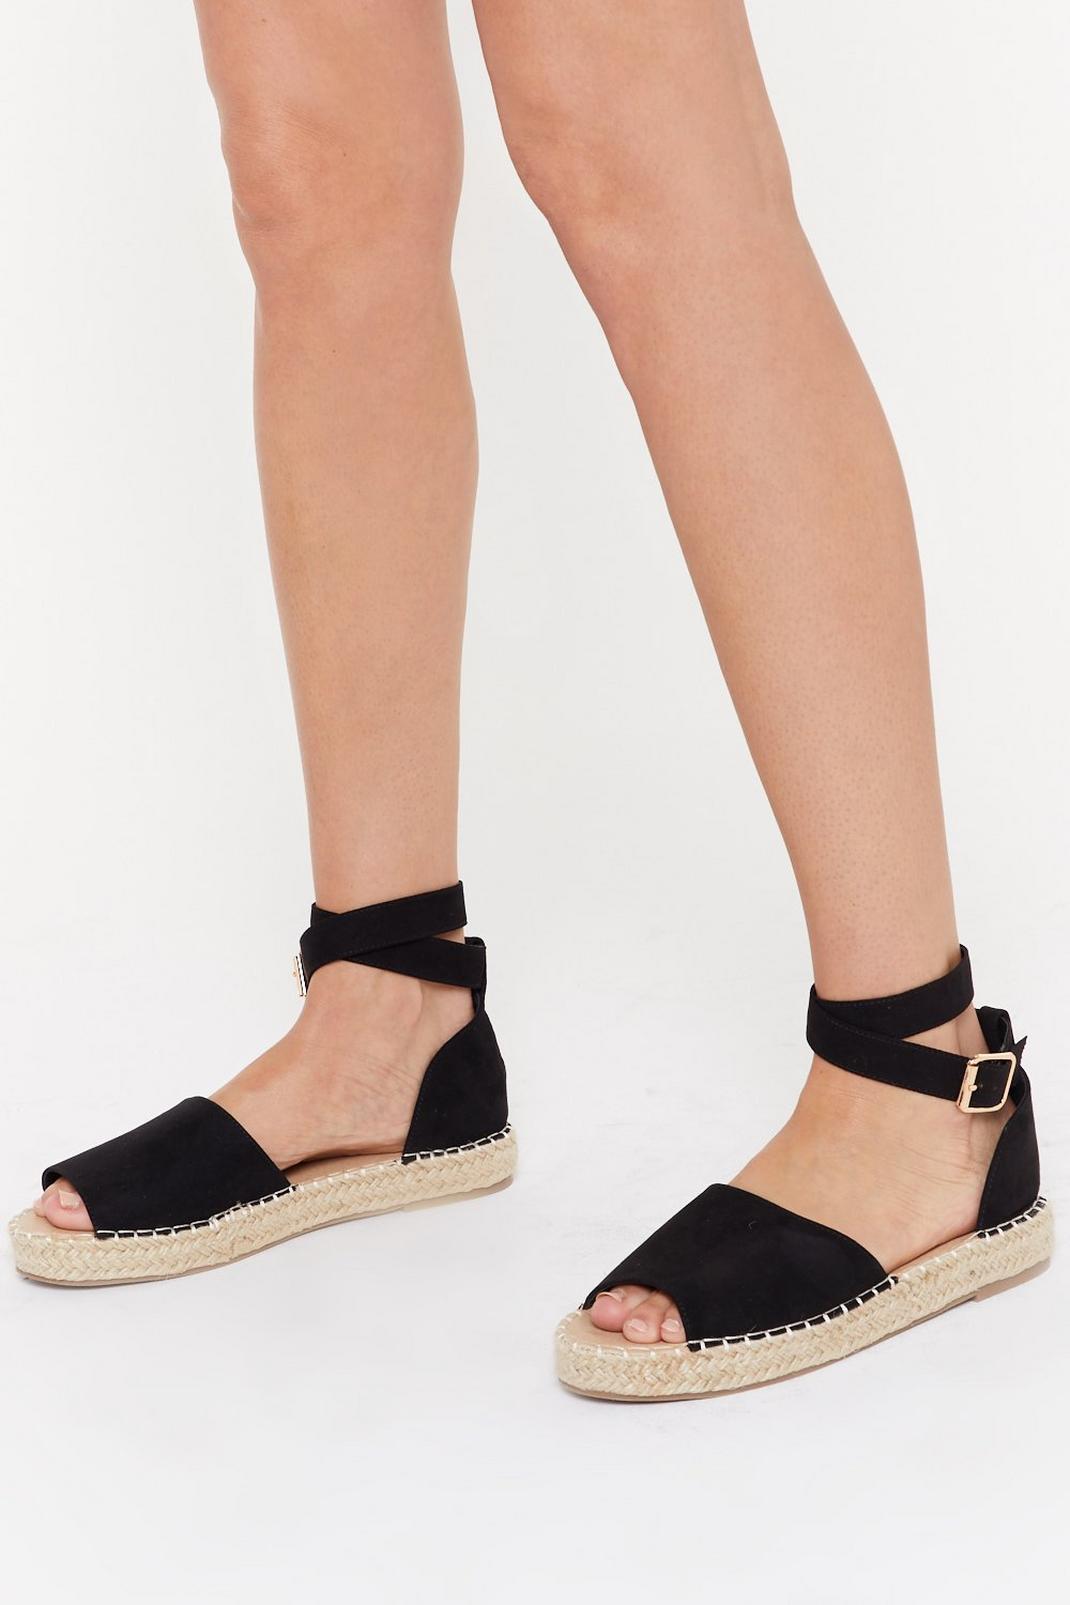 Immi Suede Open Toe Ankle Buckle Espadrilles image number 1